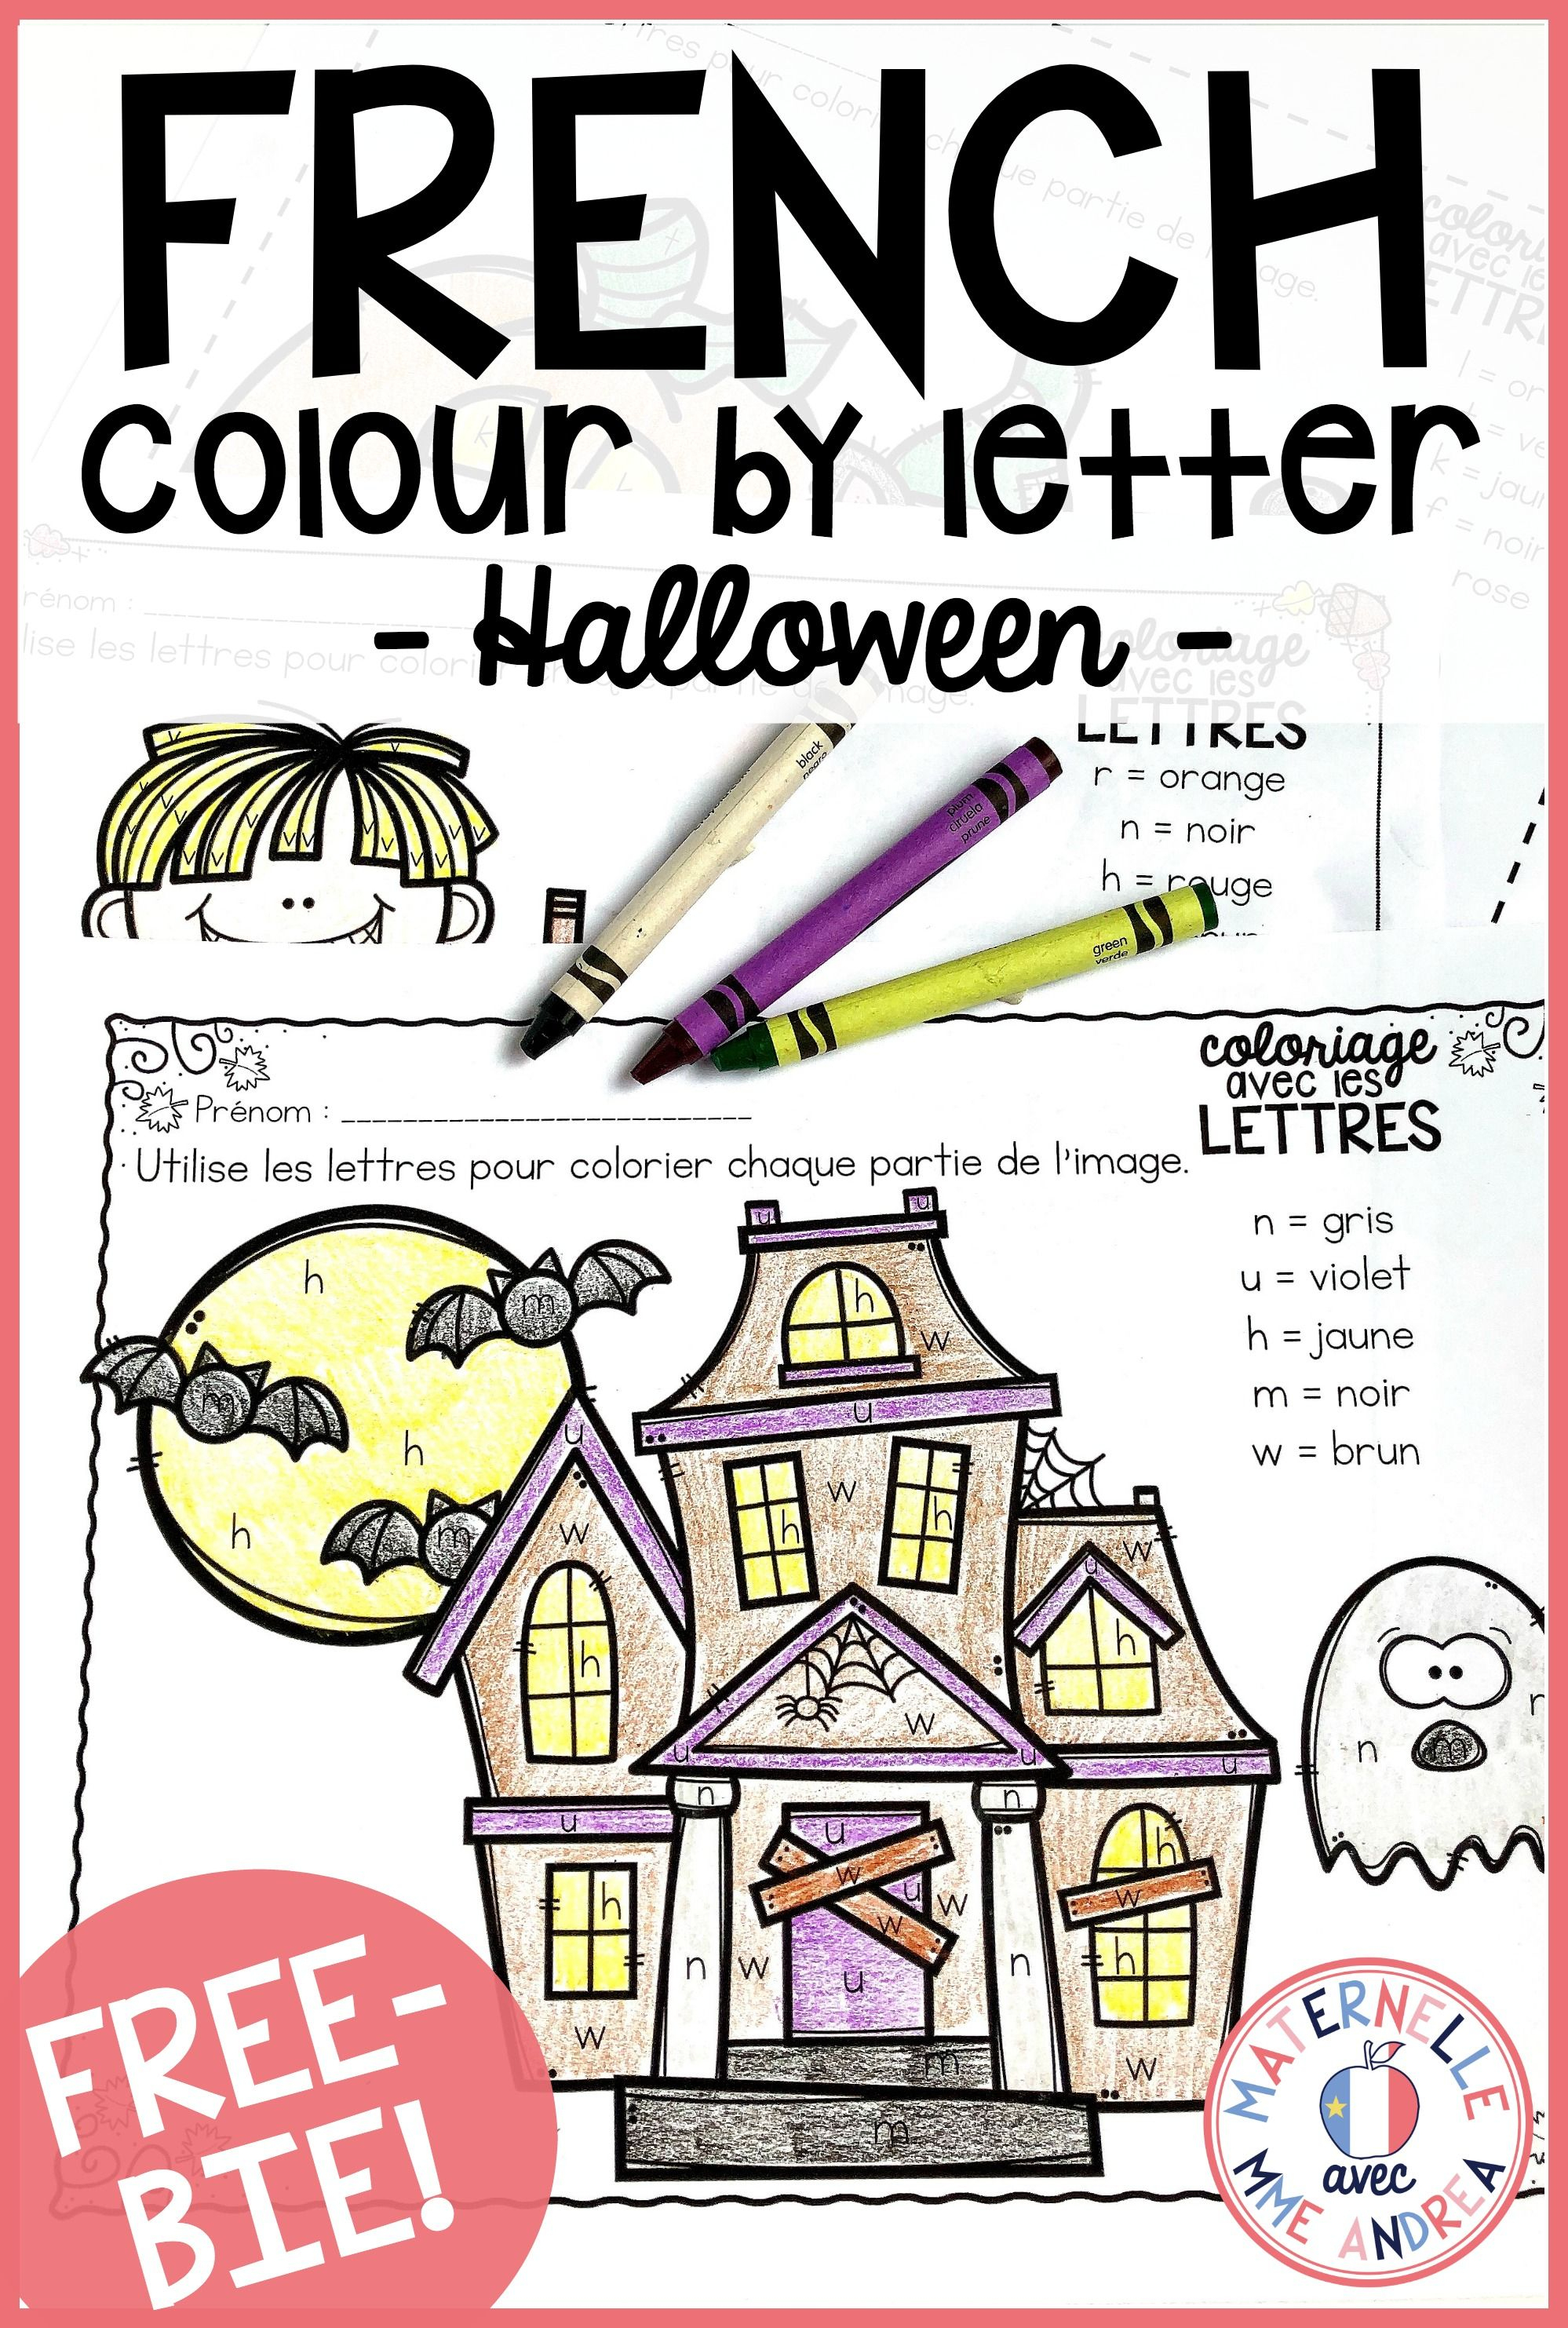 Gratuit! Free French Fall/halloween Colourletter Sheets | France - Free Printable French Halloween Worksheets